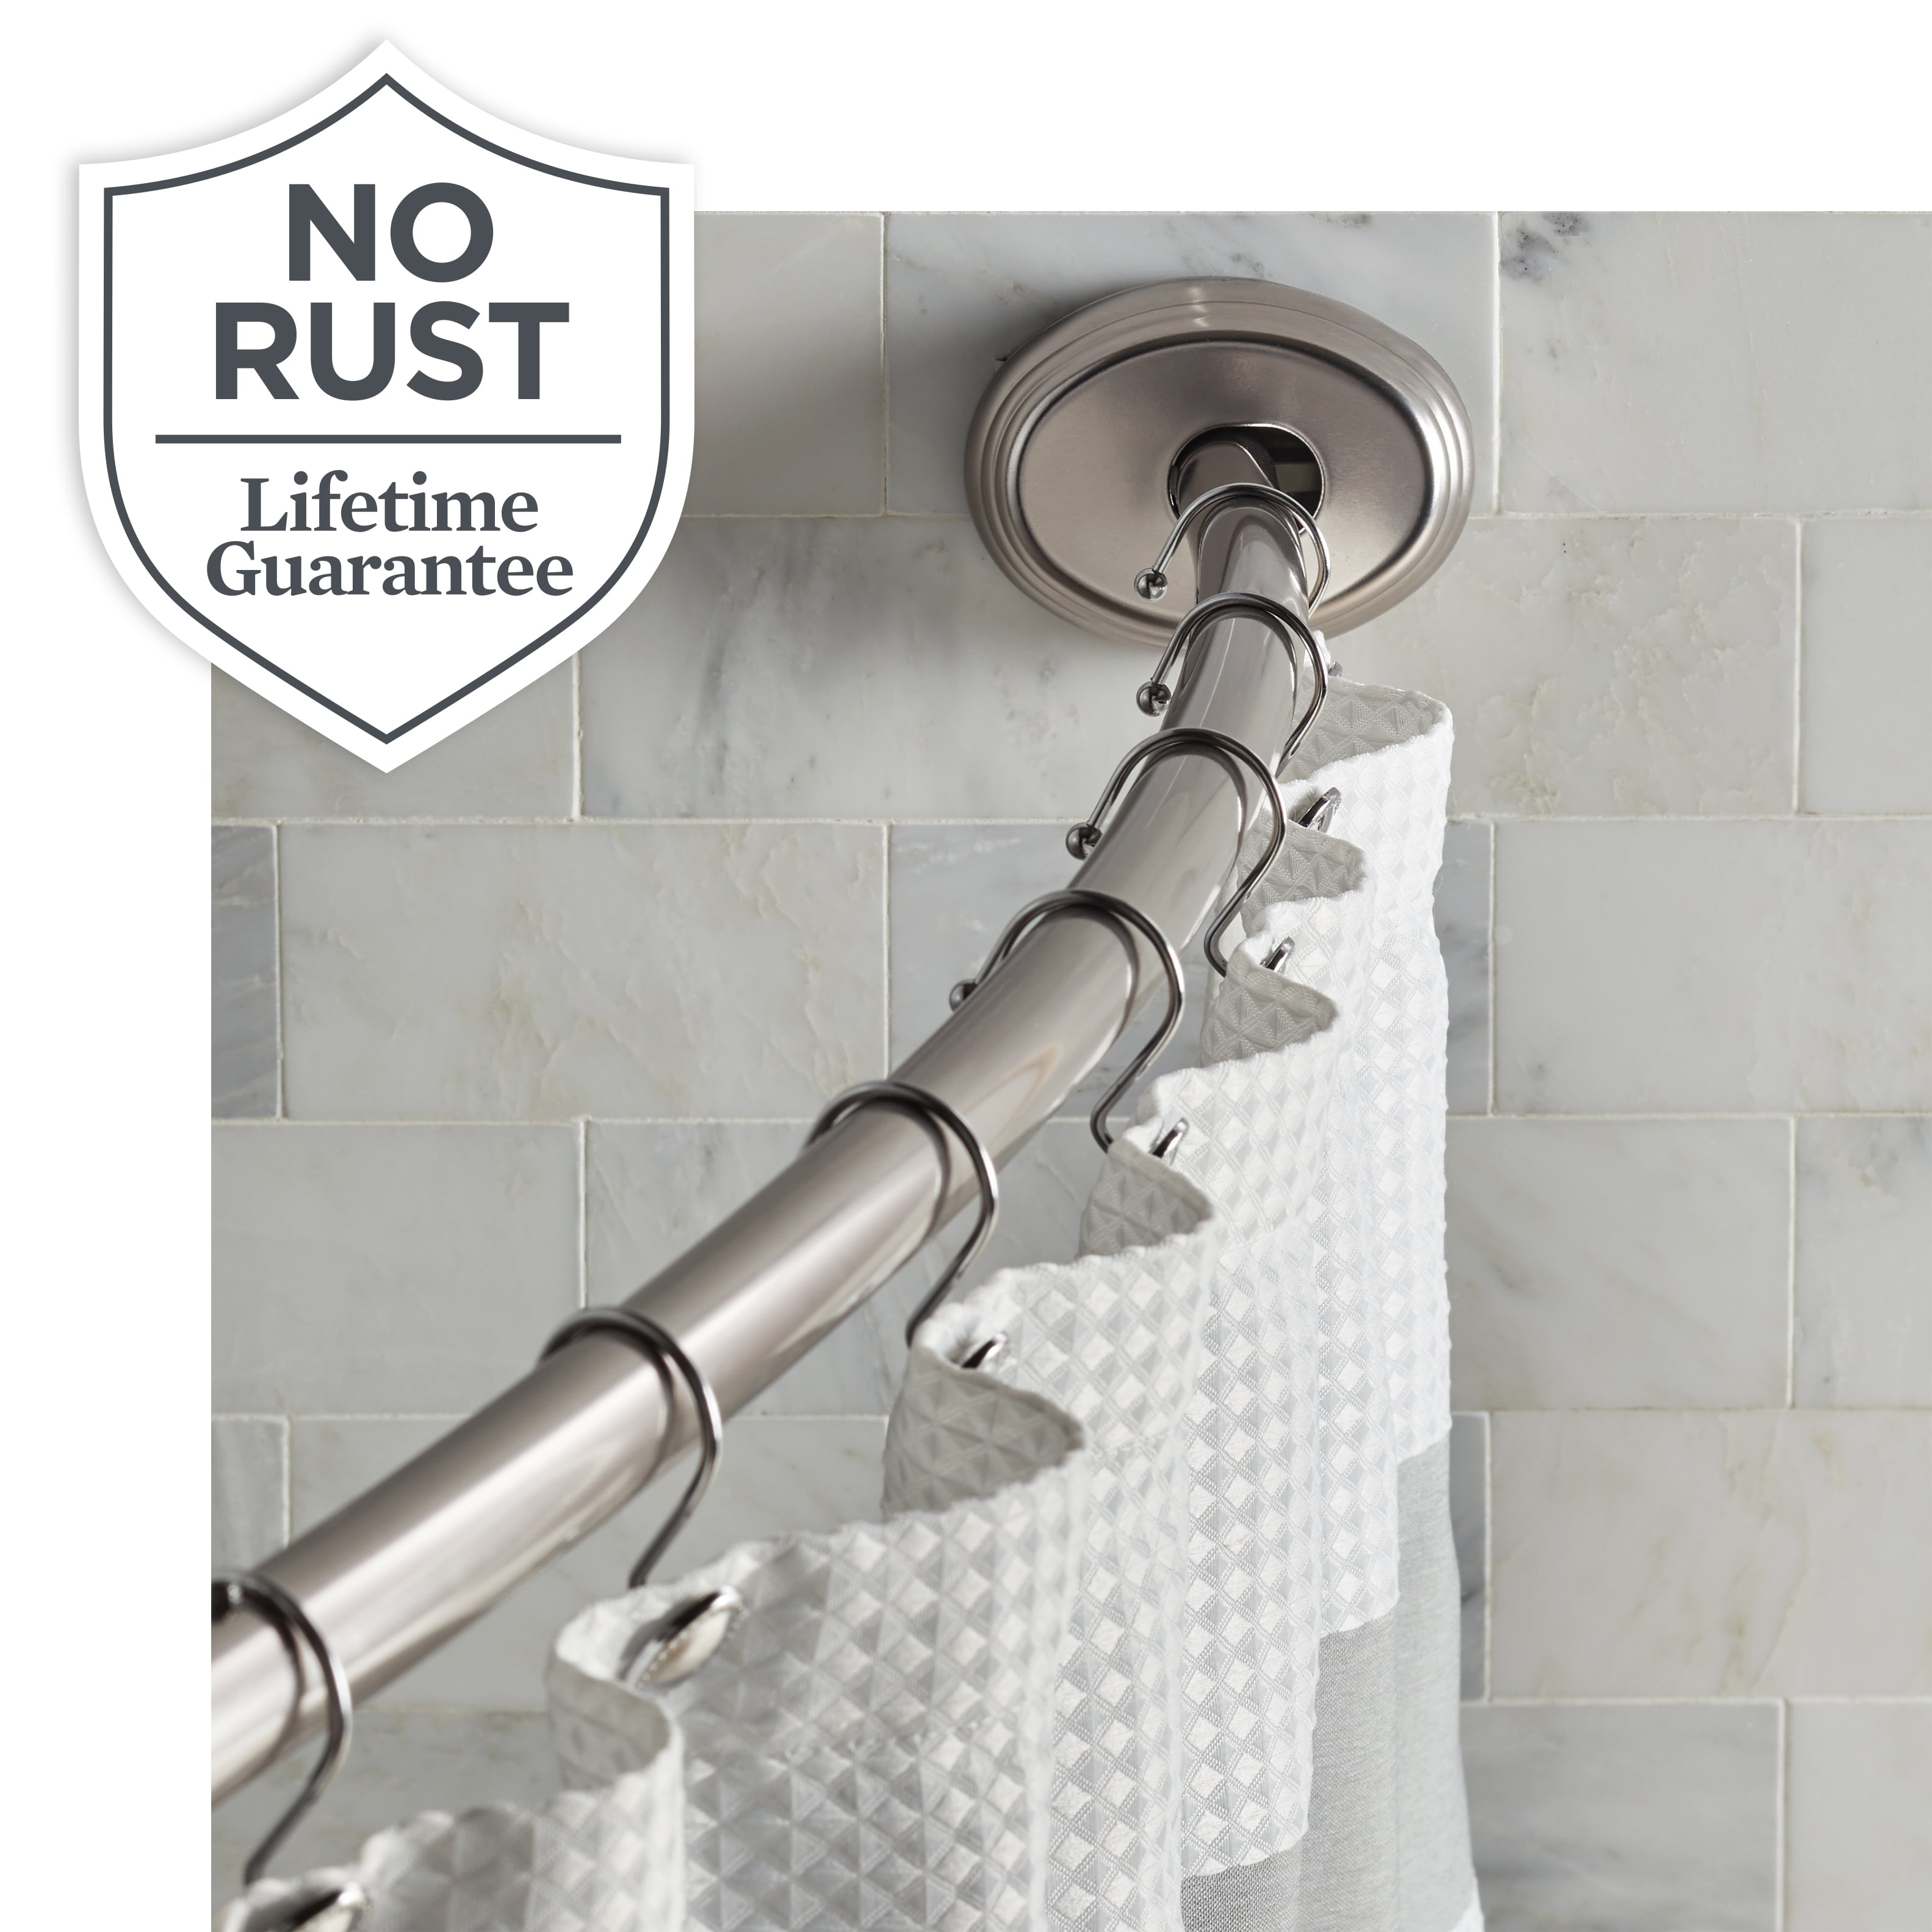 How To Put Up A Tension Shower Rod Brushed Nickel Shower Curtain Rod, 50" - 72", Better Homes & Gardens  Rustproof 2-Way Mount Curved - Walmart.com